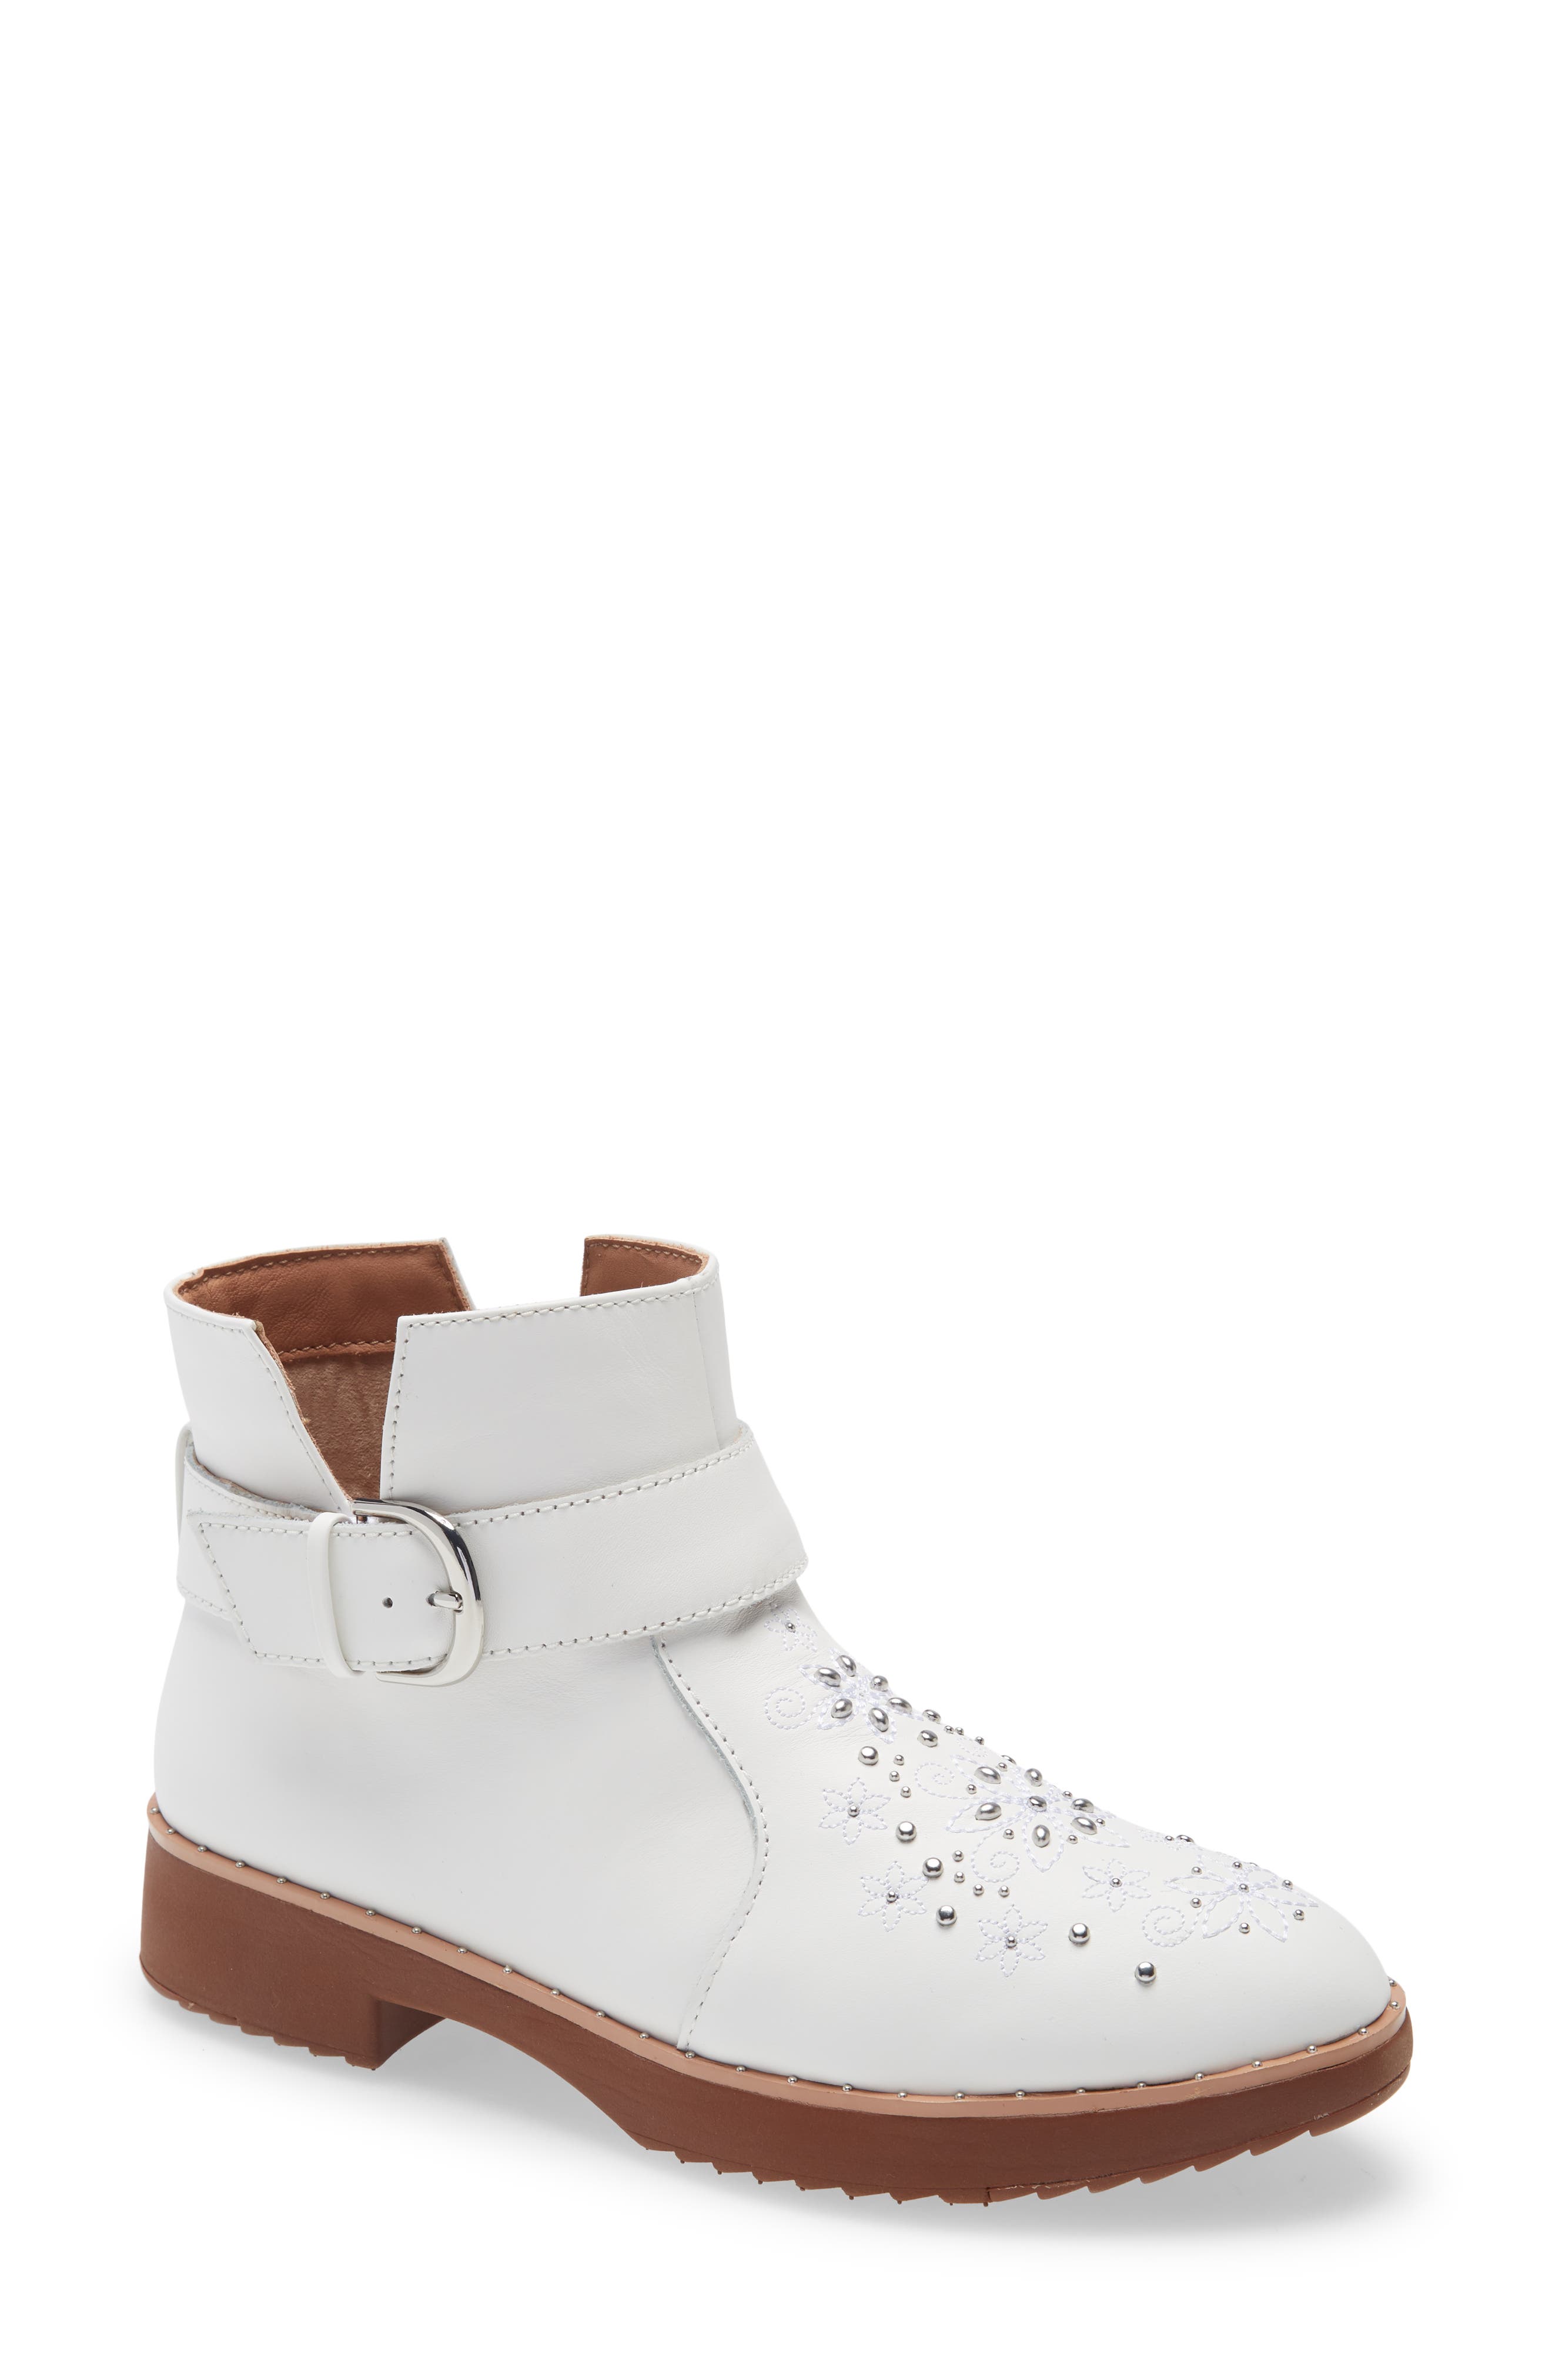 Fitflop Athena Flower Stud Ankle Boot In Urban White